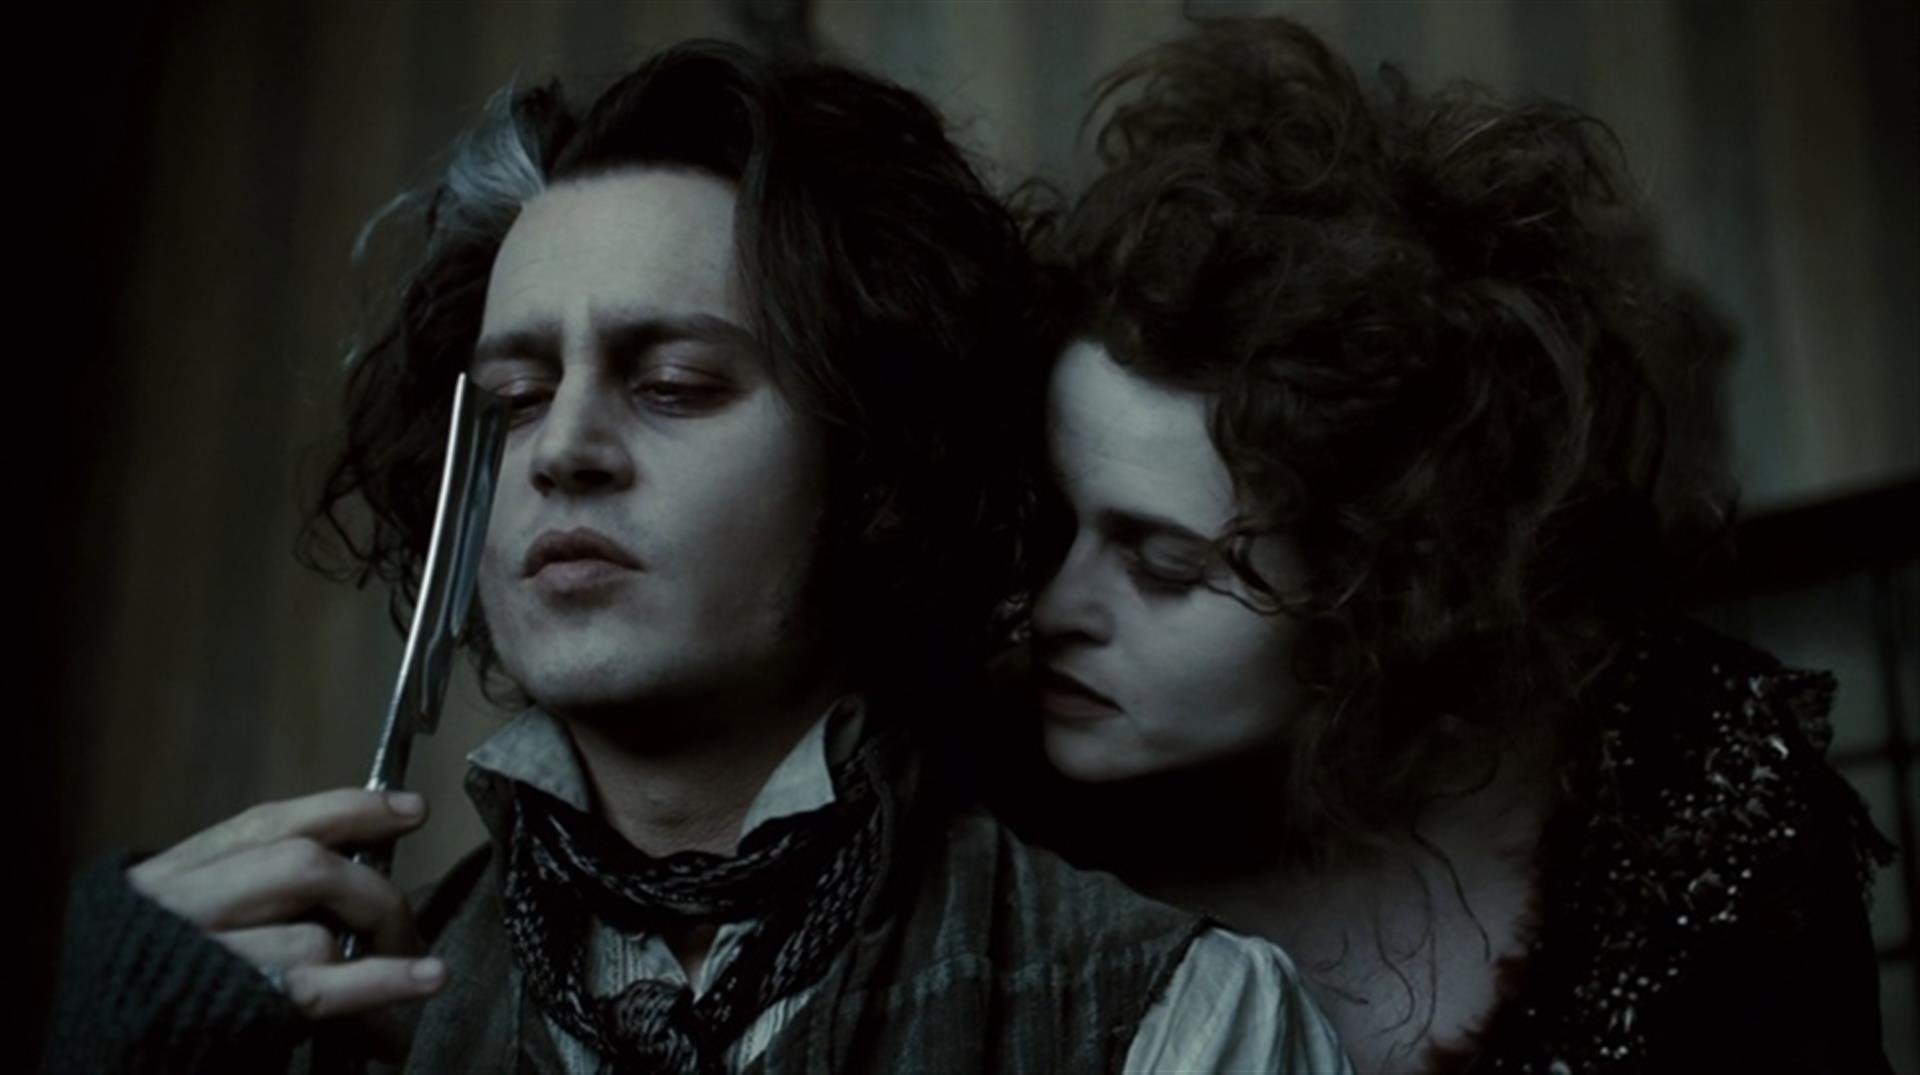 Lowther Cinema: Sweeney Todd: The Demon Barber of Fleet Street (18) - Lowther Pavilion